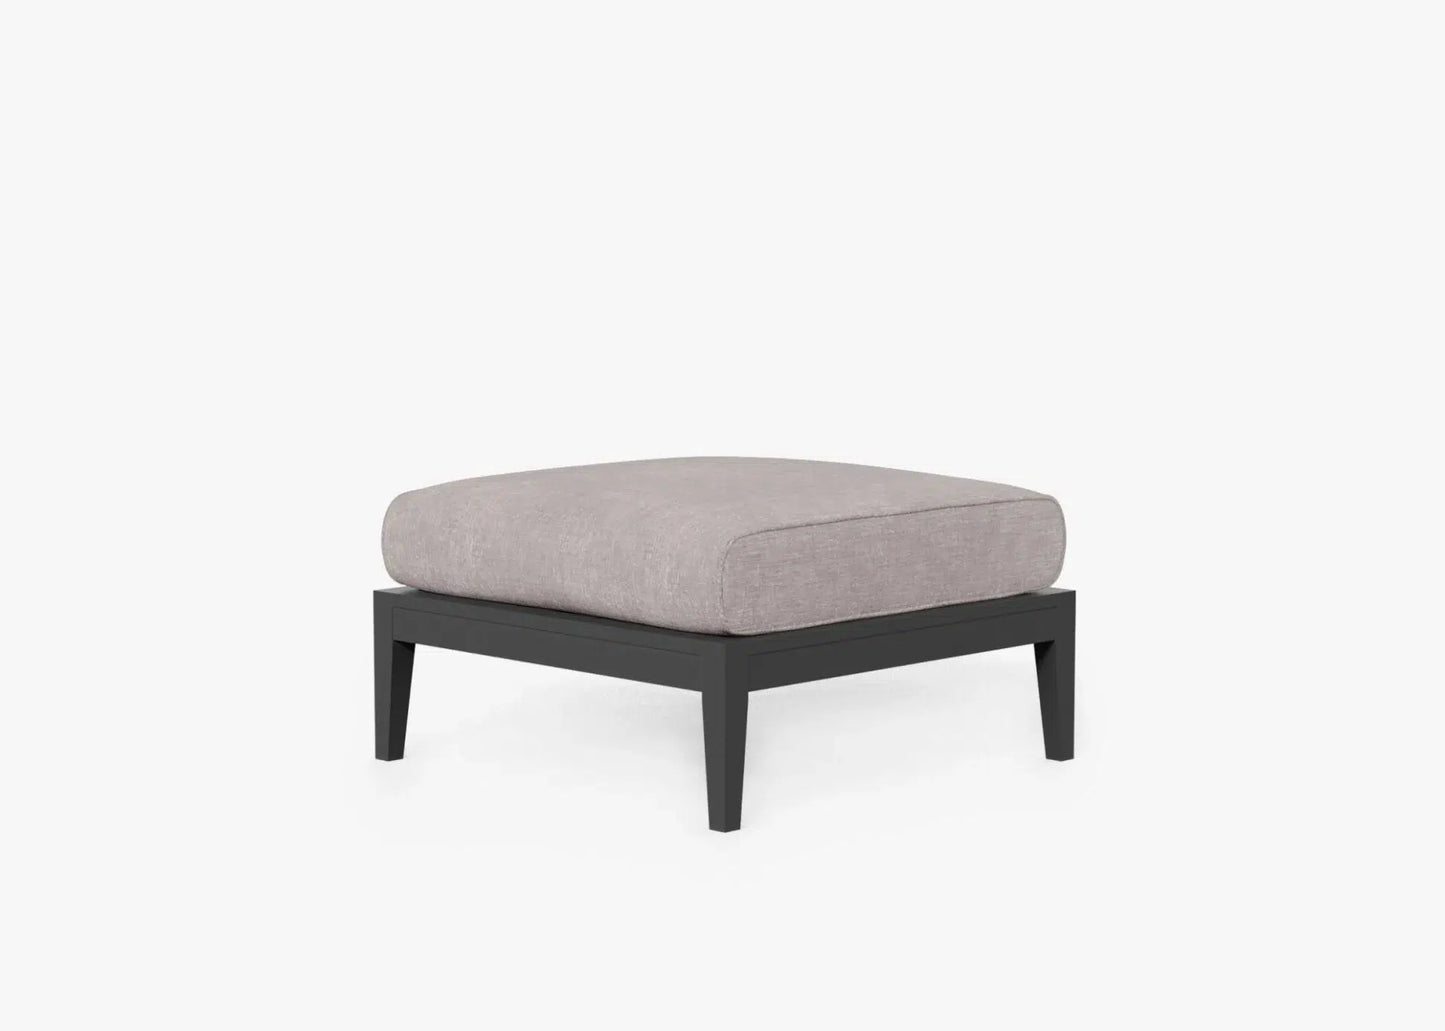 Live Outer 29" Charcoal Aluminum Outdoor Ottoman With Sandstone Gray Cushion